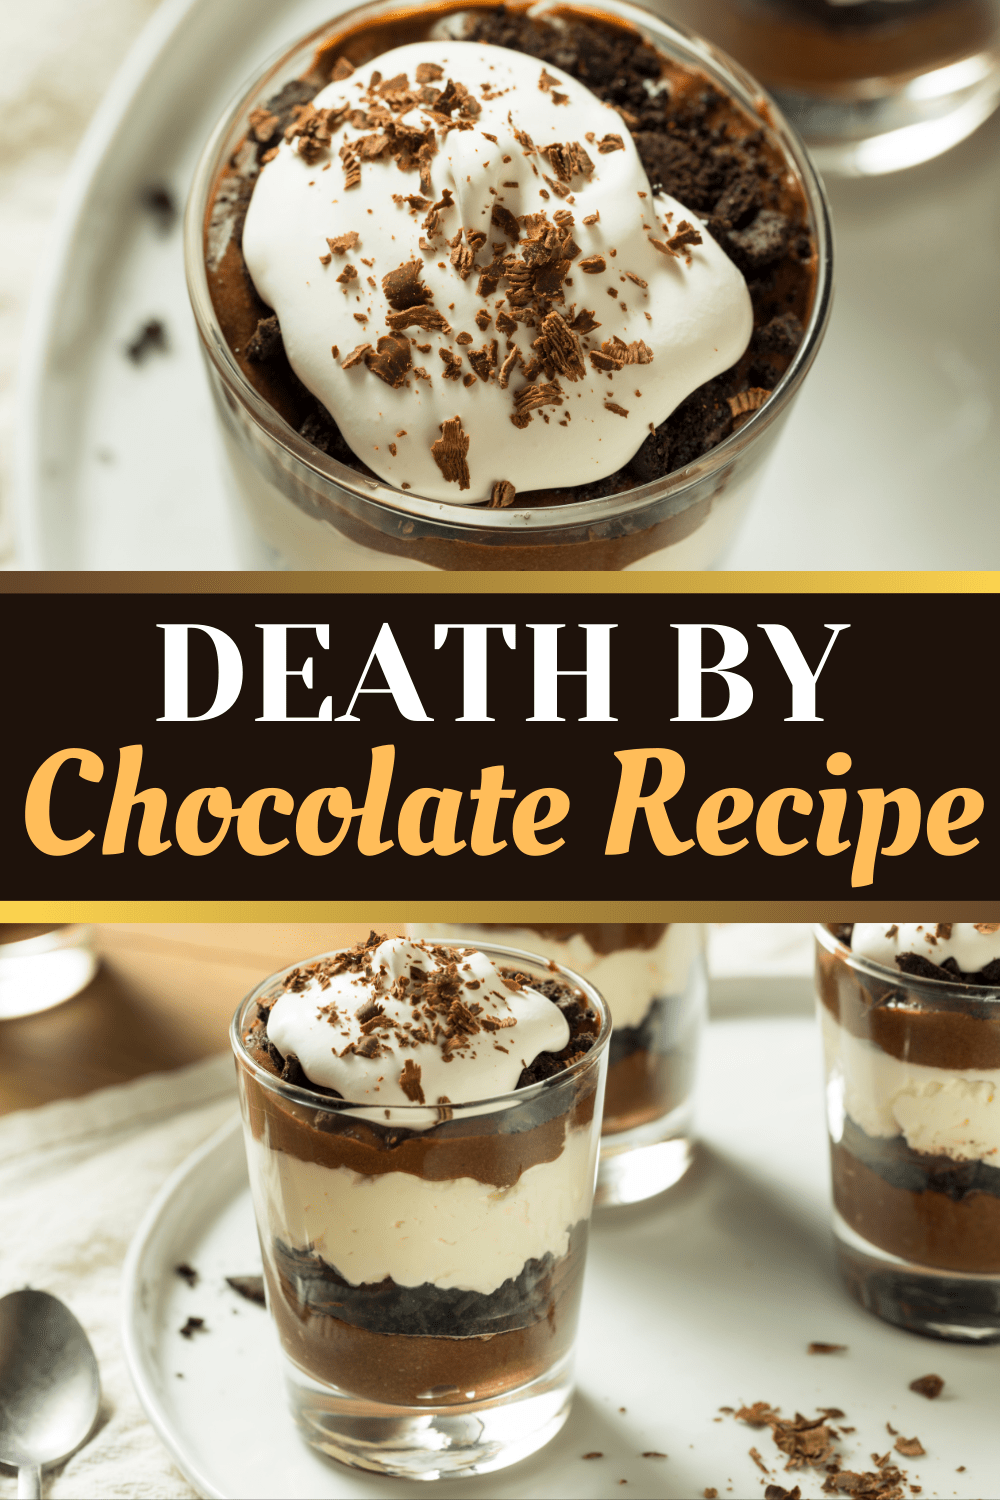 Death By Chocolate Recipe - Insanely Good